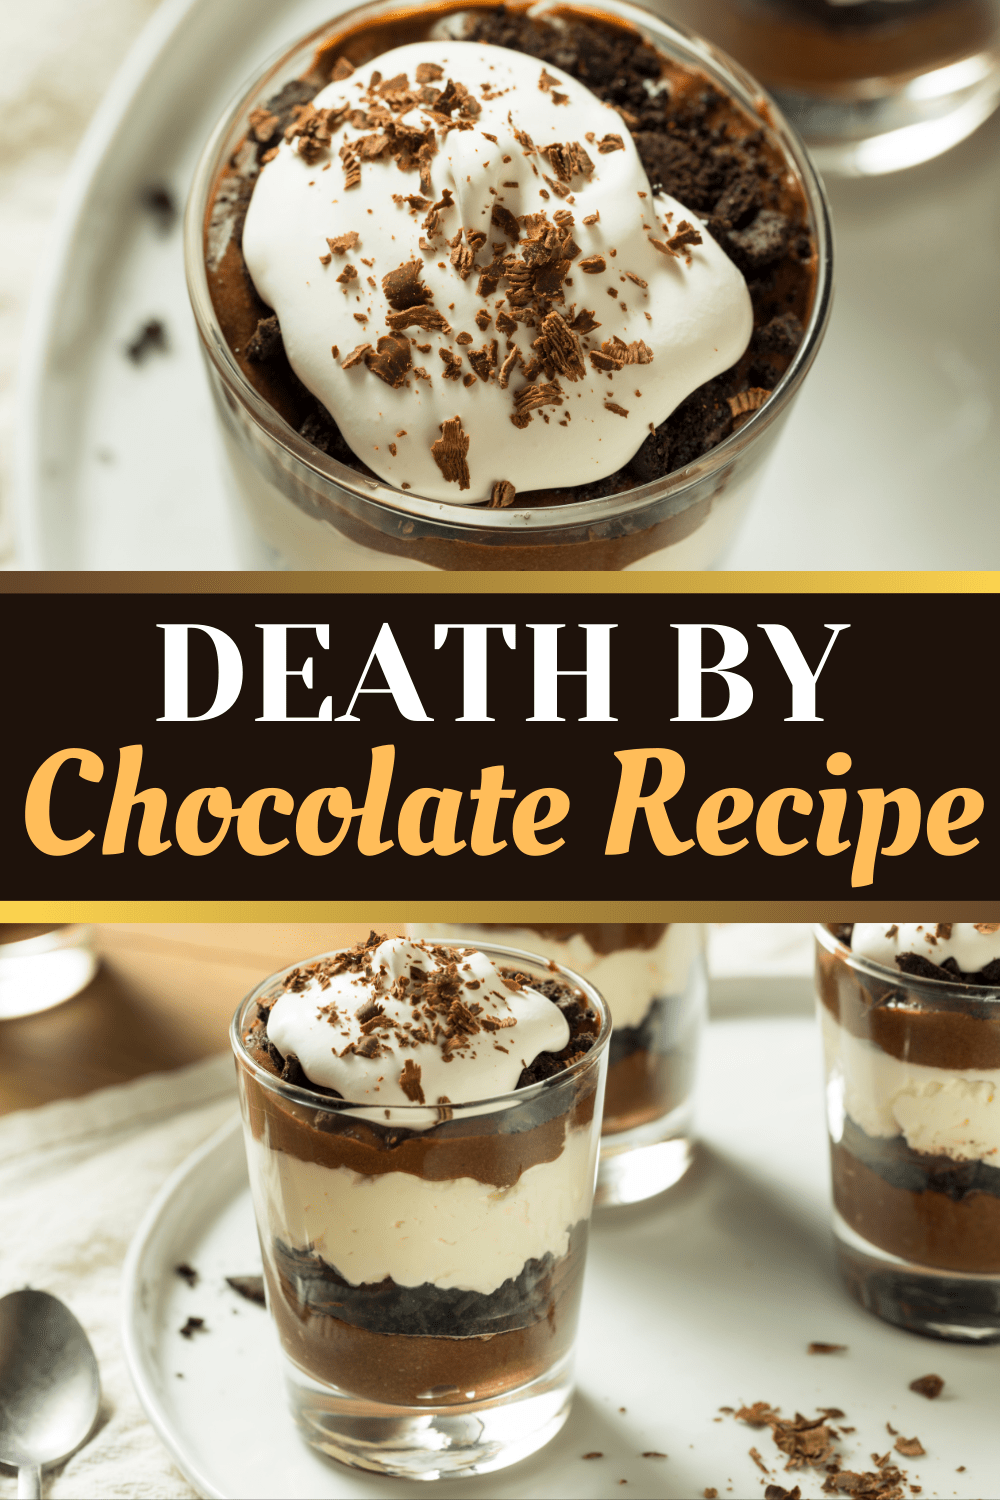 Death By Chocolate Recipe - Insanely Good